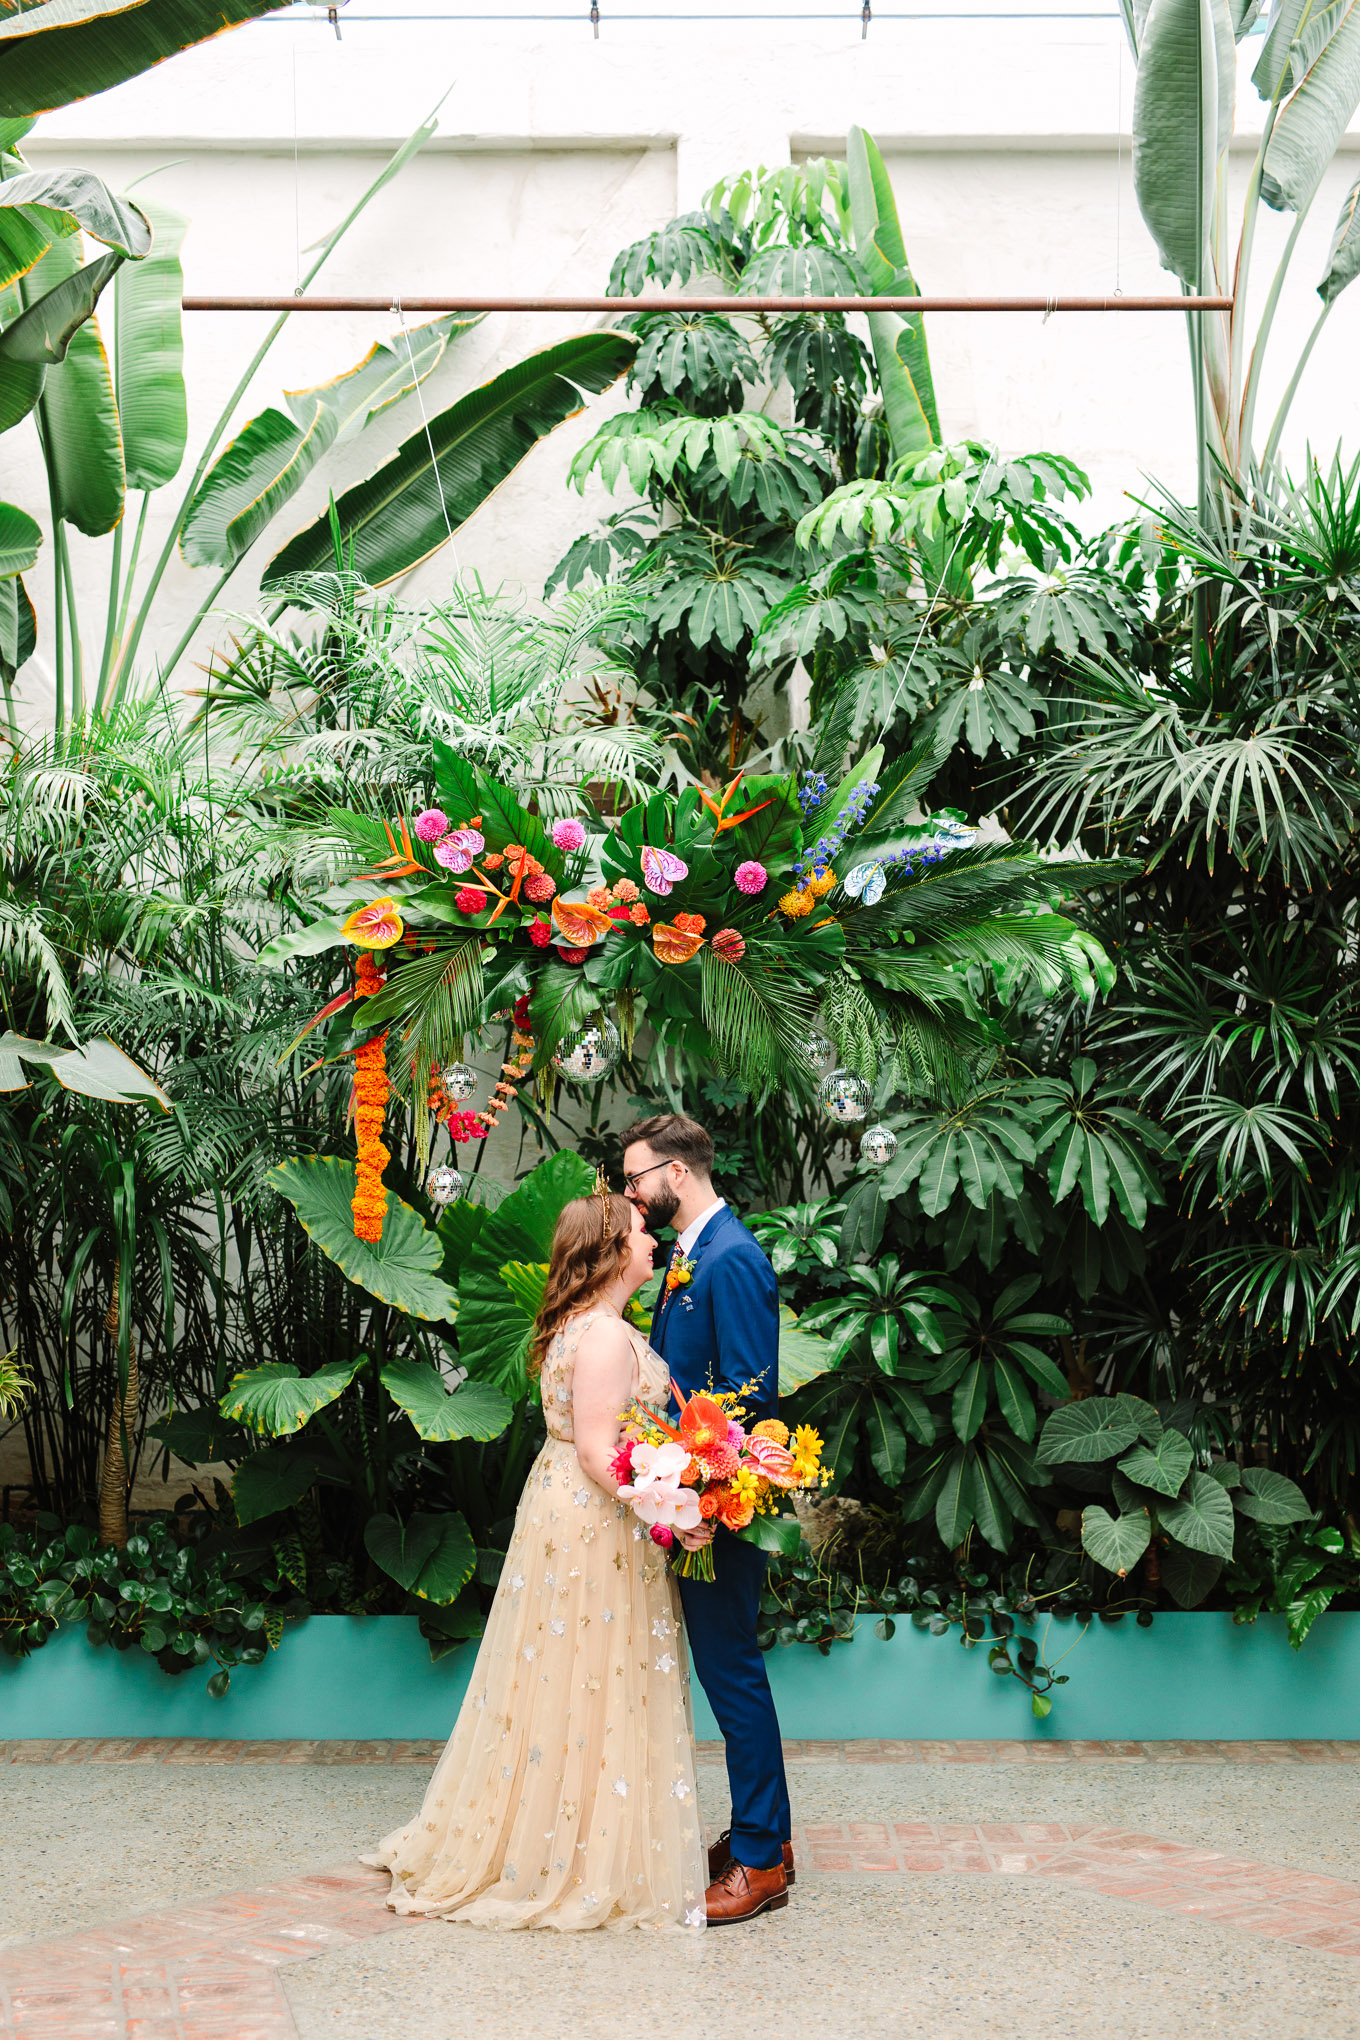 Bride and groom in front of tropical plants and colorful ceremony backdrop | Colorful Downtown Los Angeles Valentine Wedding | Los Angeles wedding photographer | #losangeleswedding #colorfulwedding #DTLA #valentinedtla   Source: Mary Costa Photography | Los Angeles